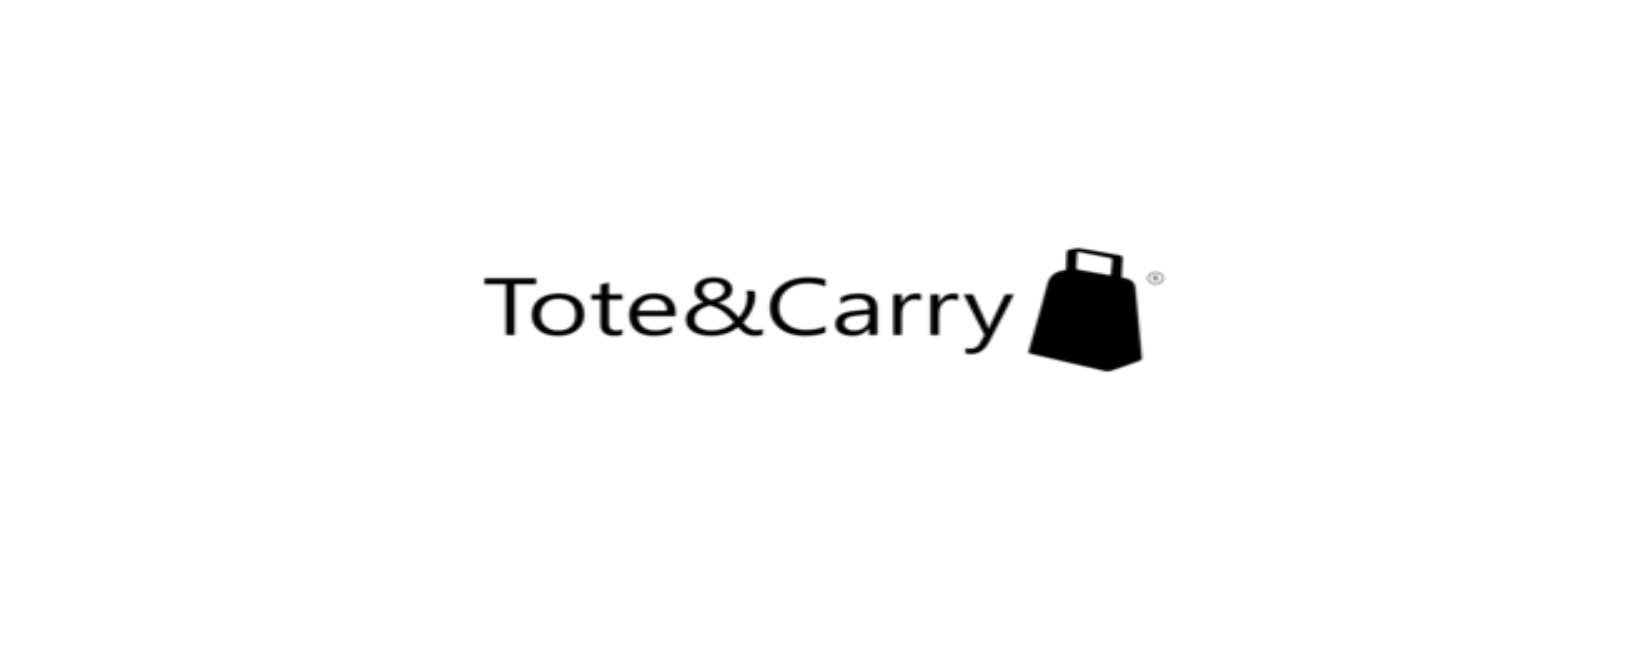 Tote&Carry Discount Code 2022